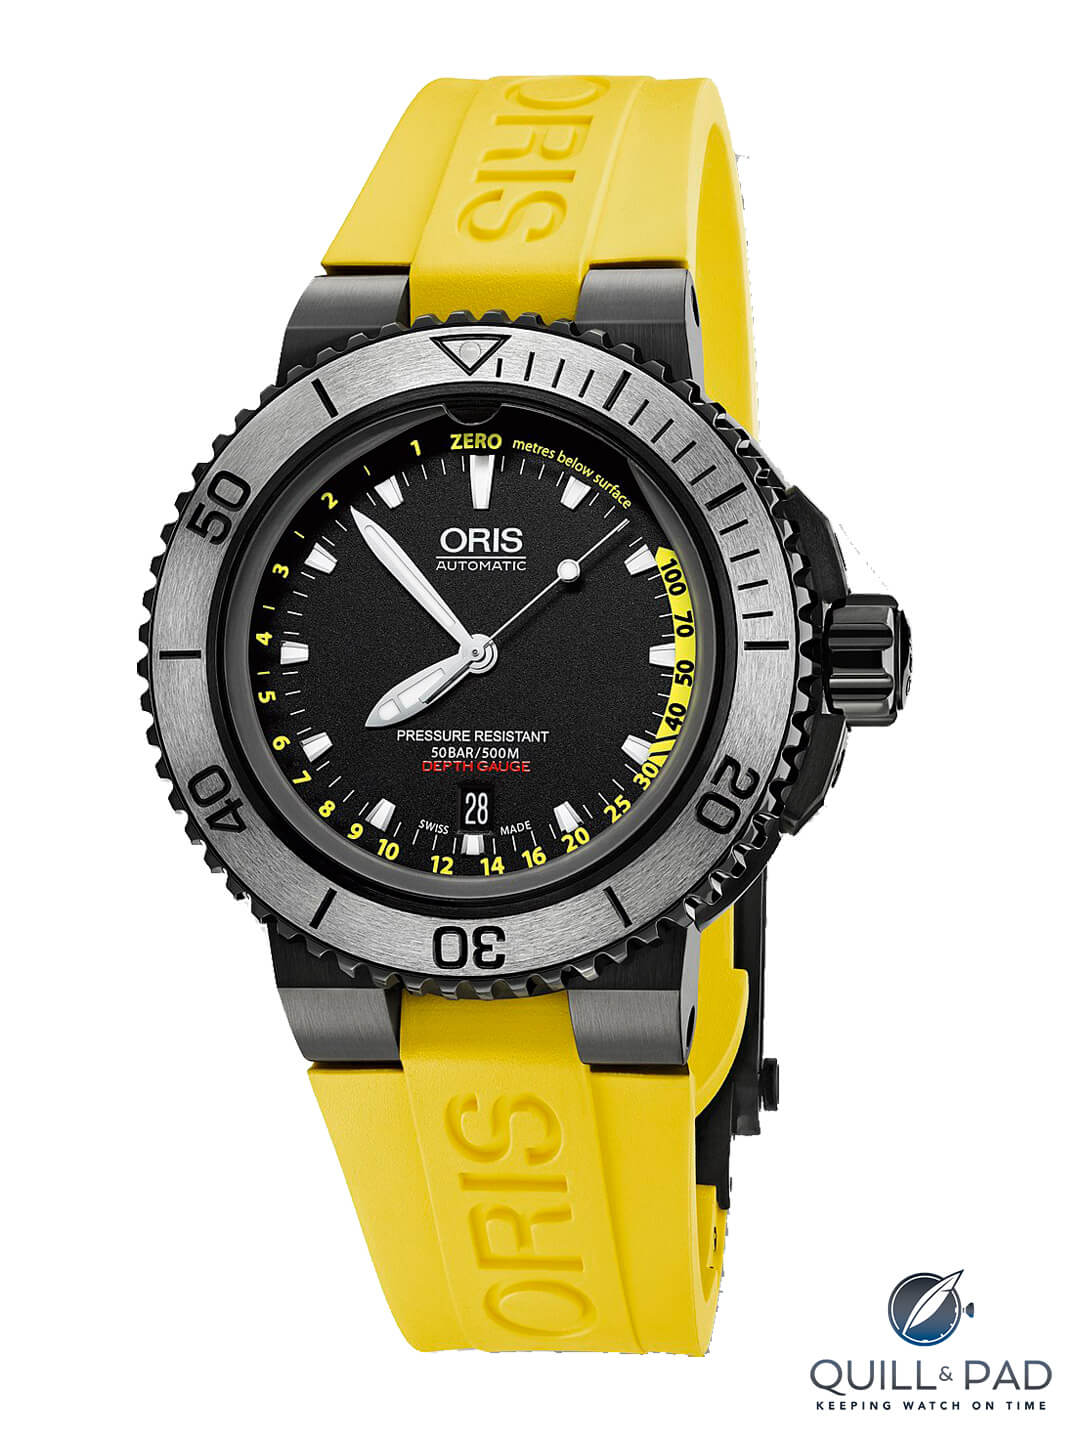 Watch with depth meter function: A Diver's Essential Tool.